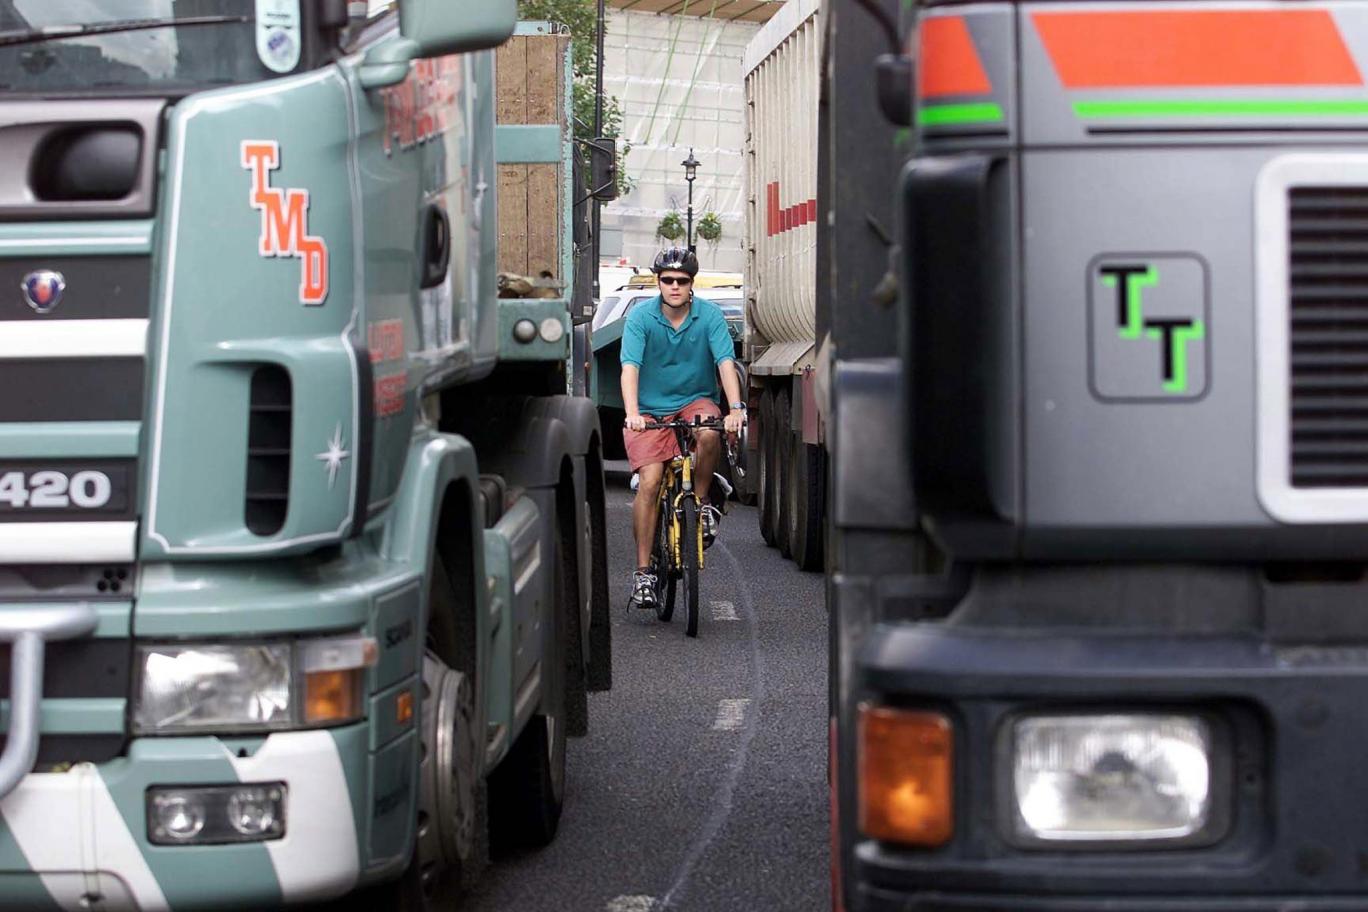 Rush-hour lorry ban is not the answer to improving safety in London, says FTA